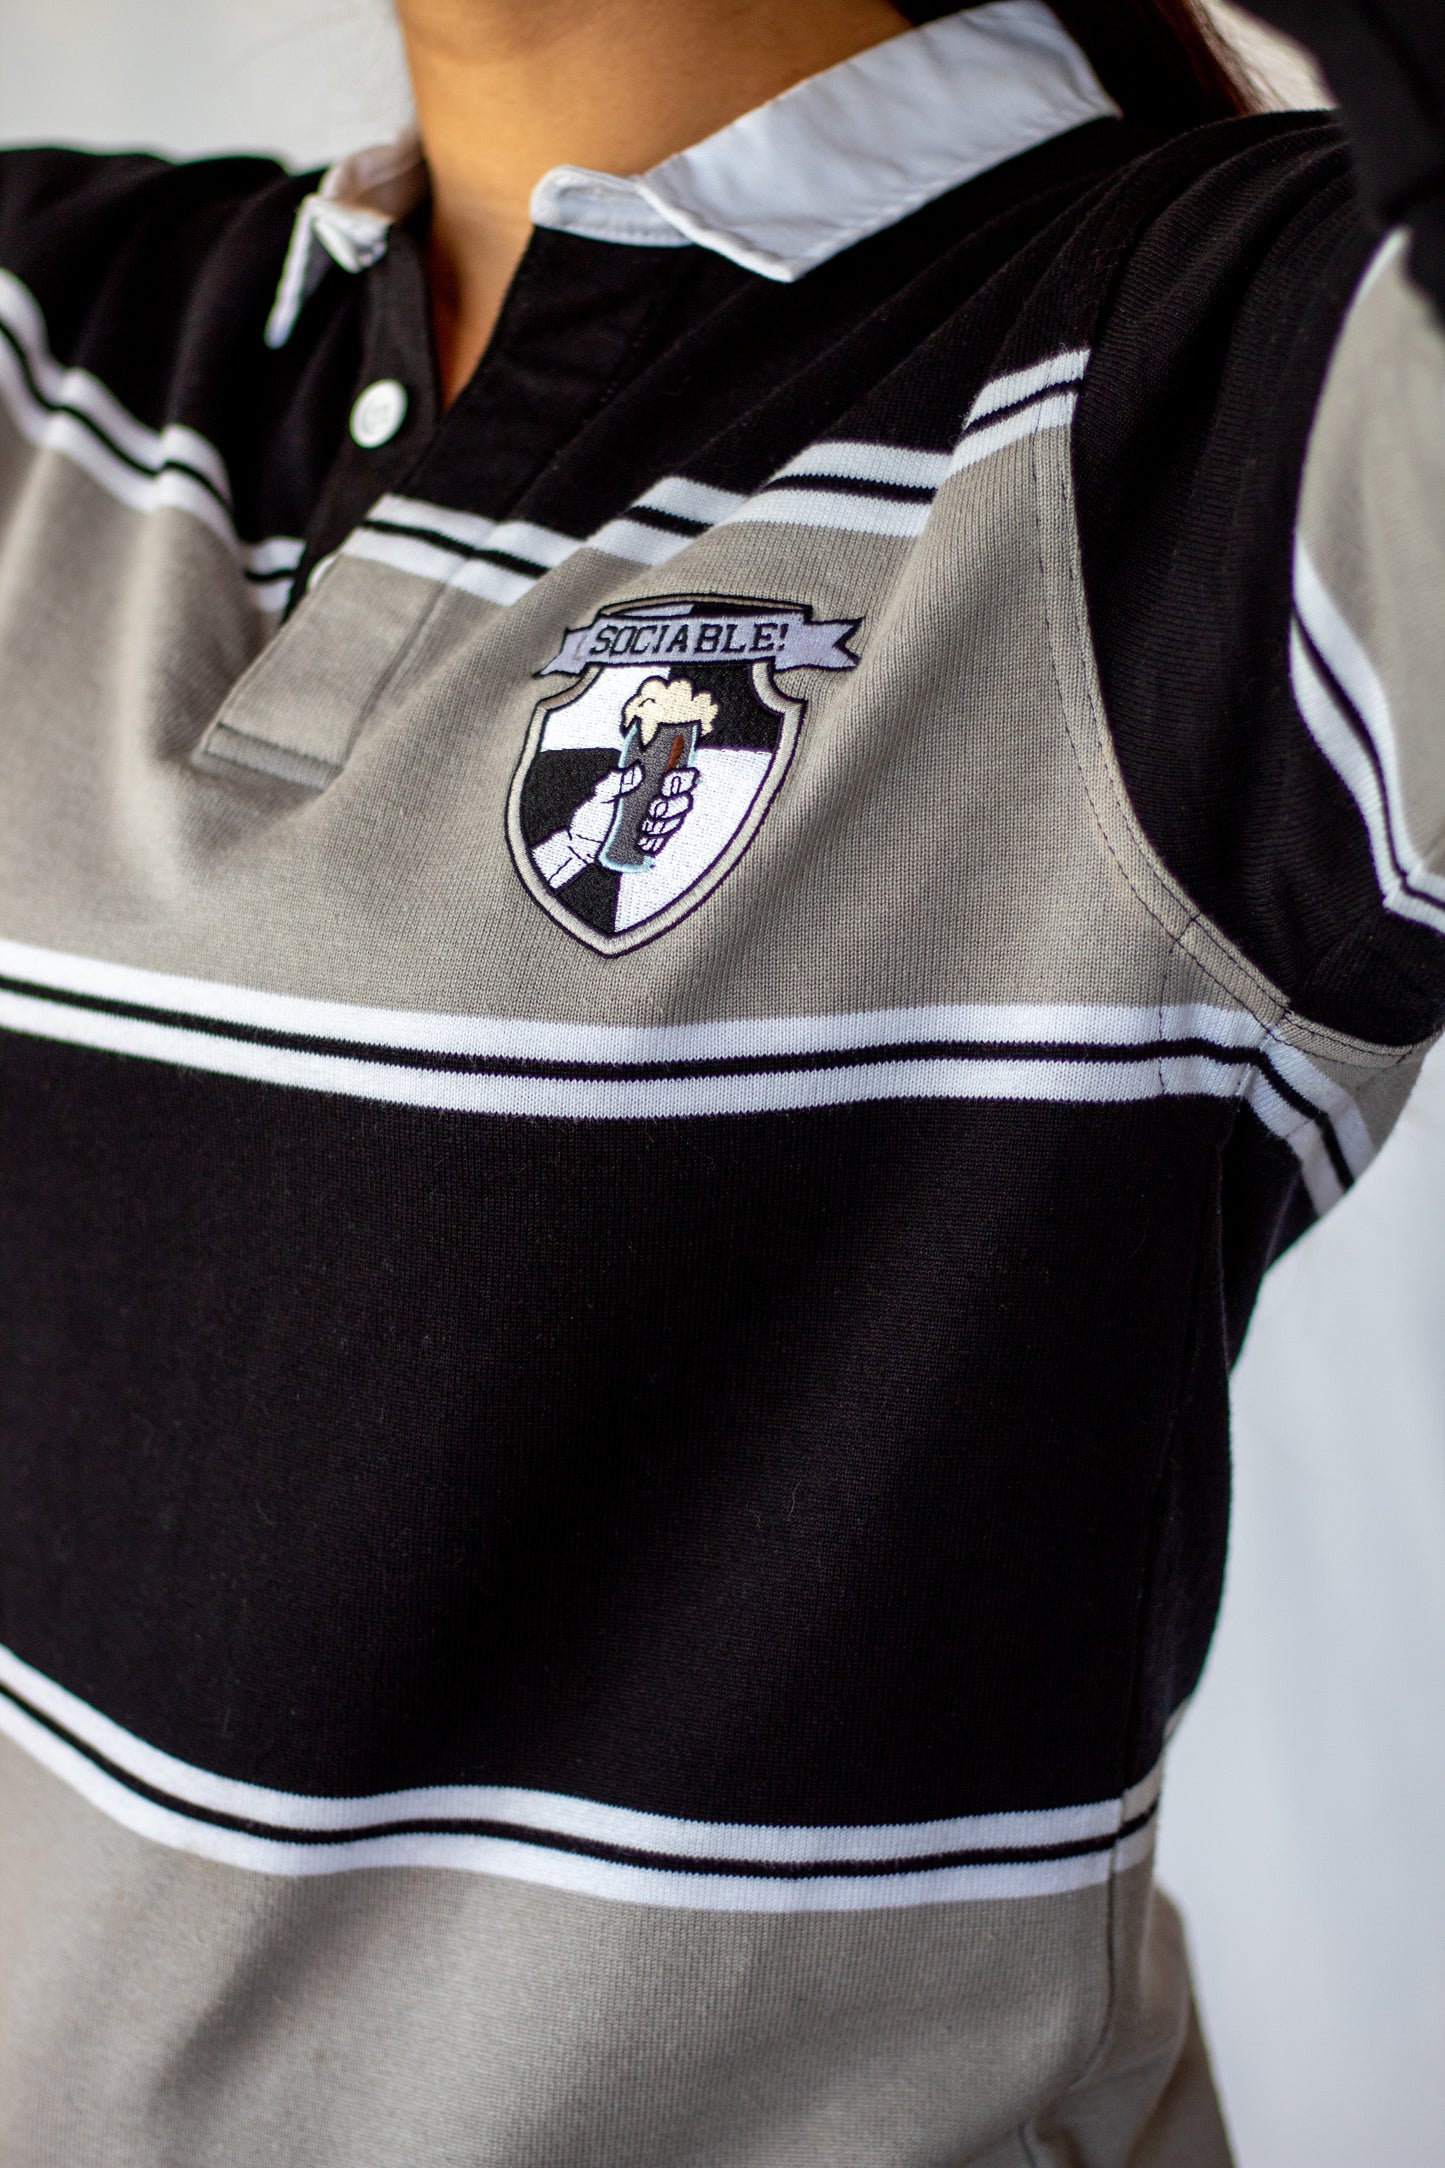 A black and grey rugby shirt with sociable beer crest